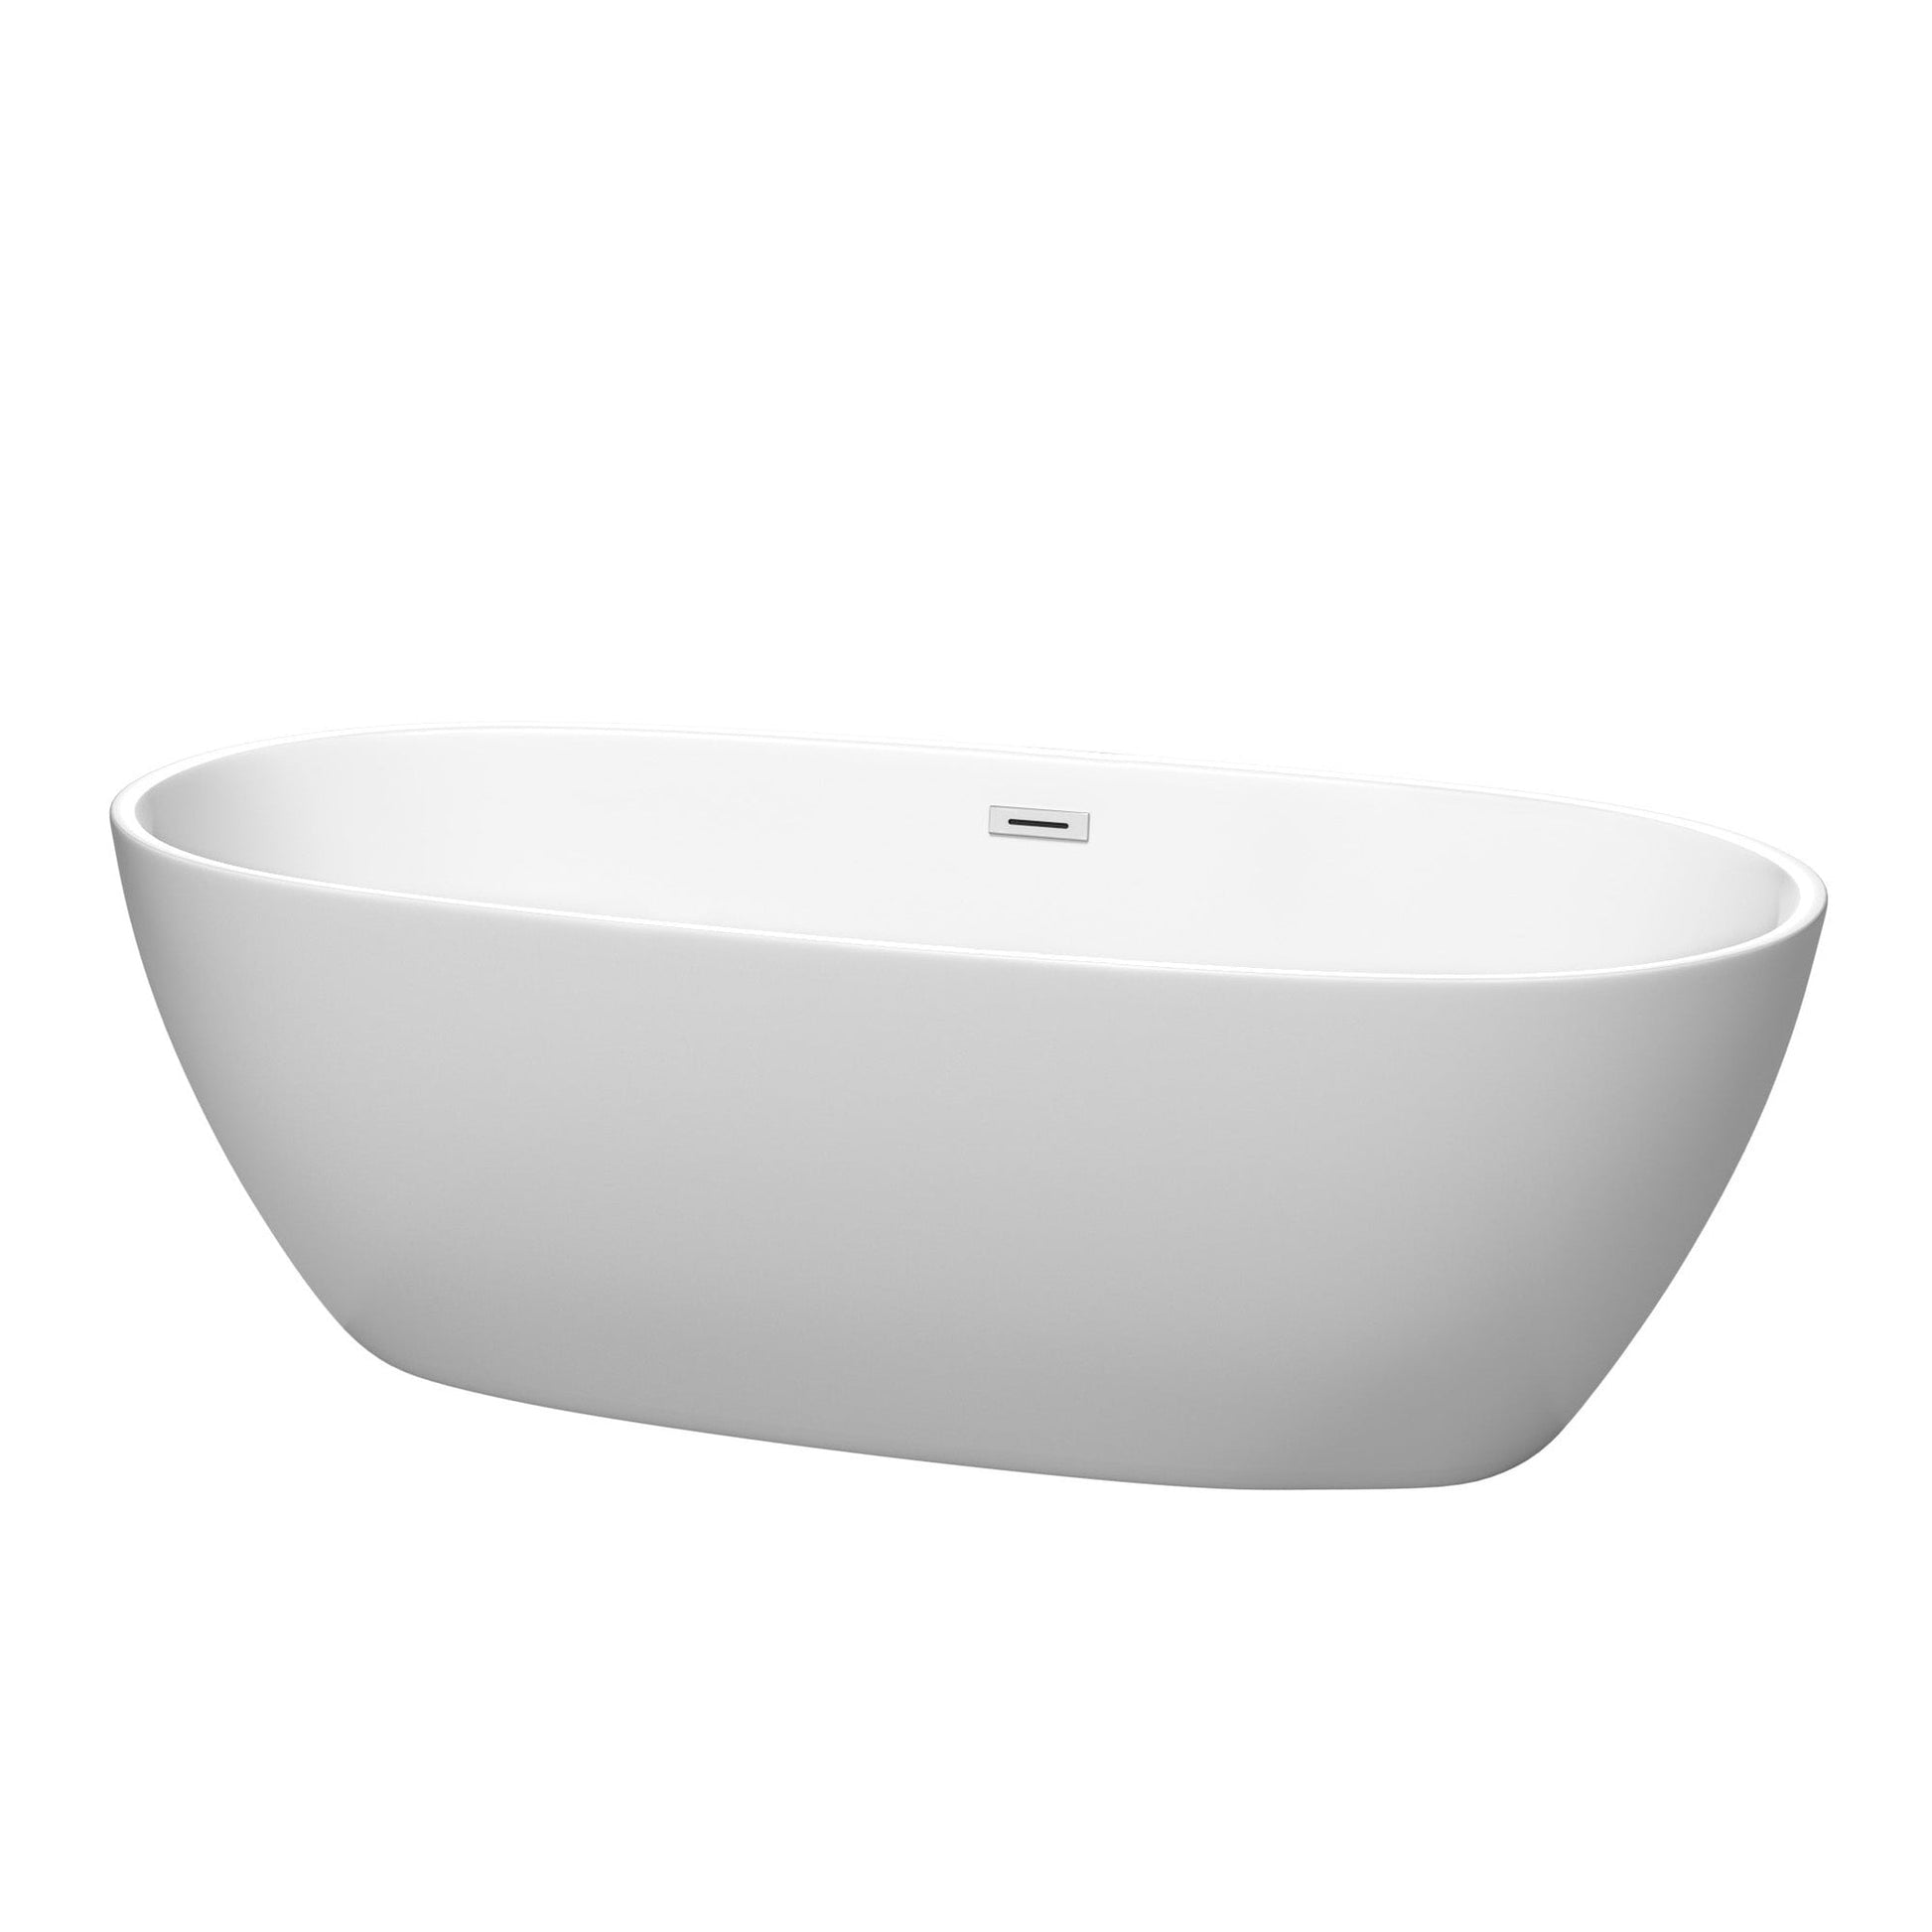 Wyndham Collection Juno 71" Freestanding Bathtub in Matte White With Polished Chrome Drain and Overflow Trim